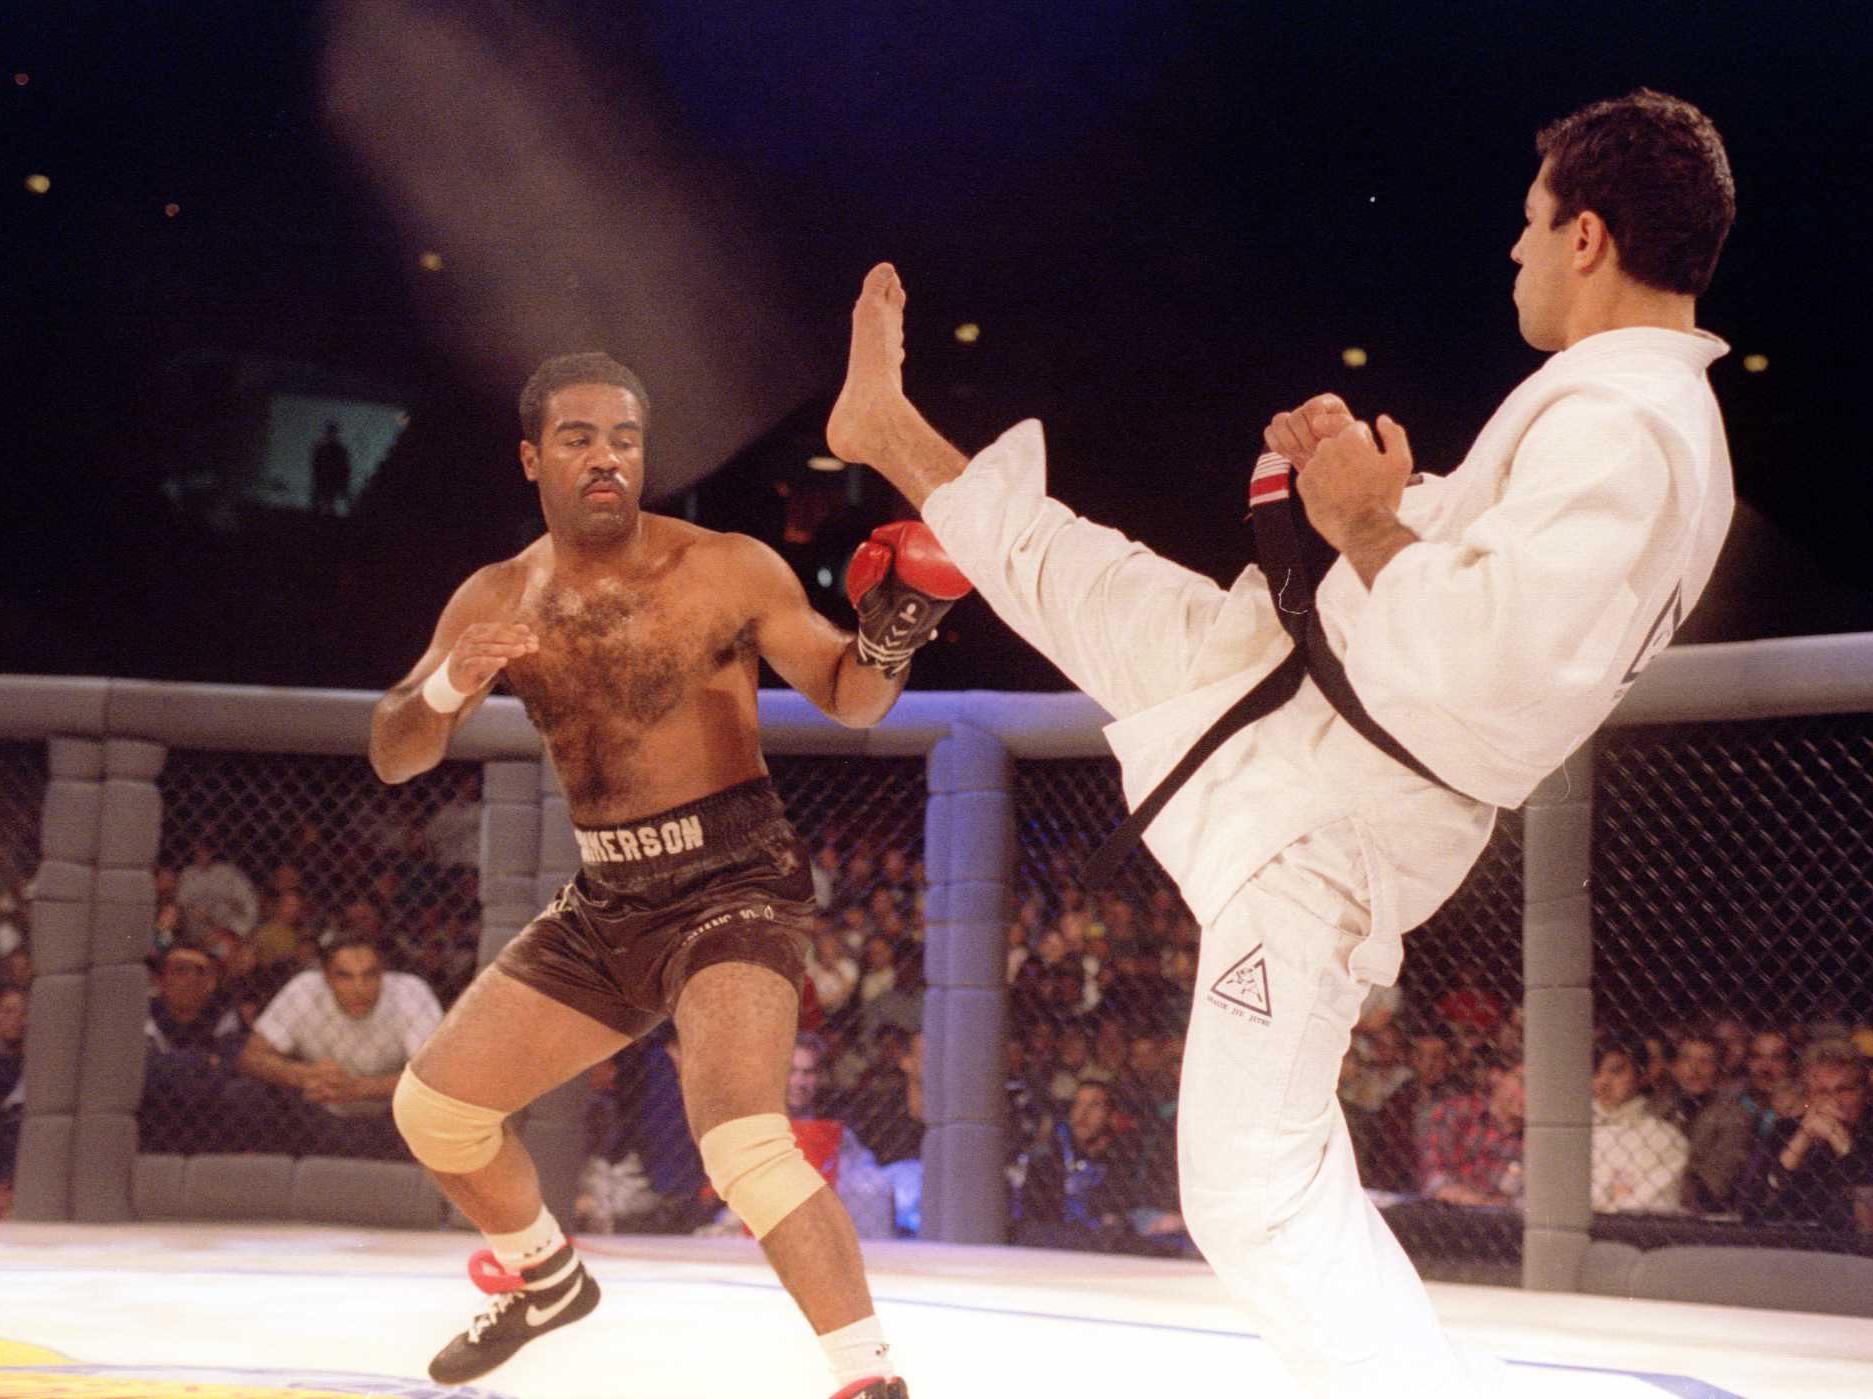 Jimmerson (left) in action against jiu-jitsu specialist Royce Gracie at UFC 1